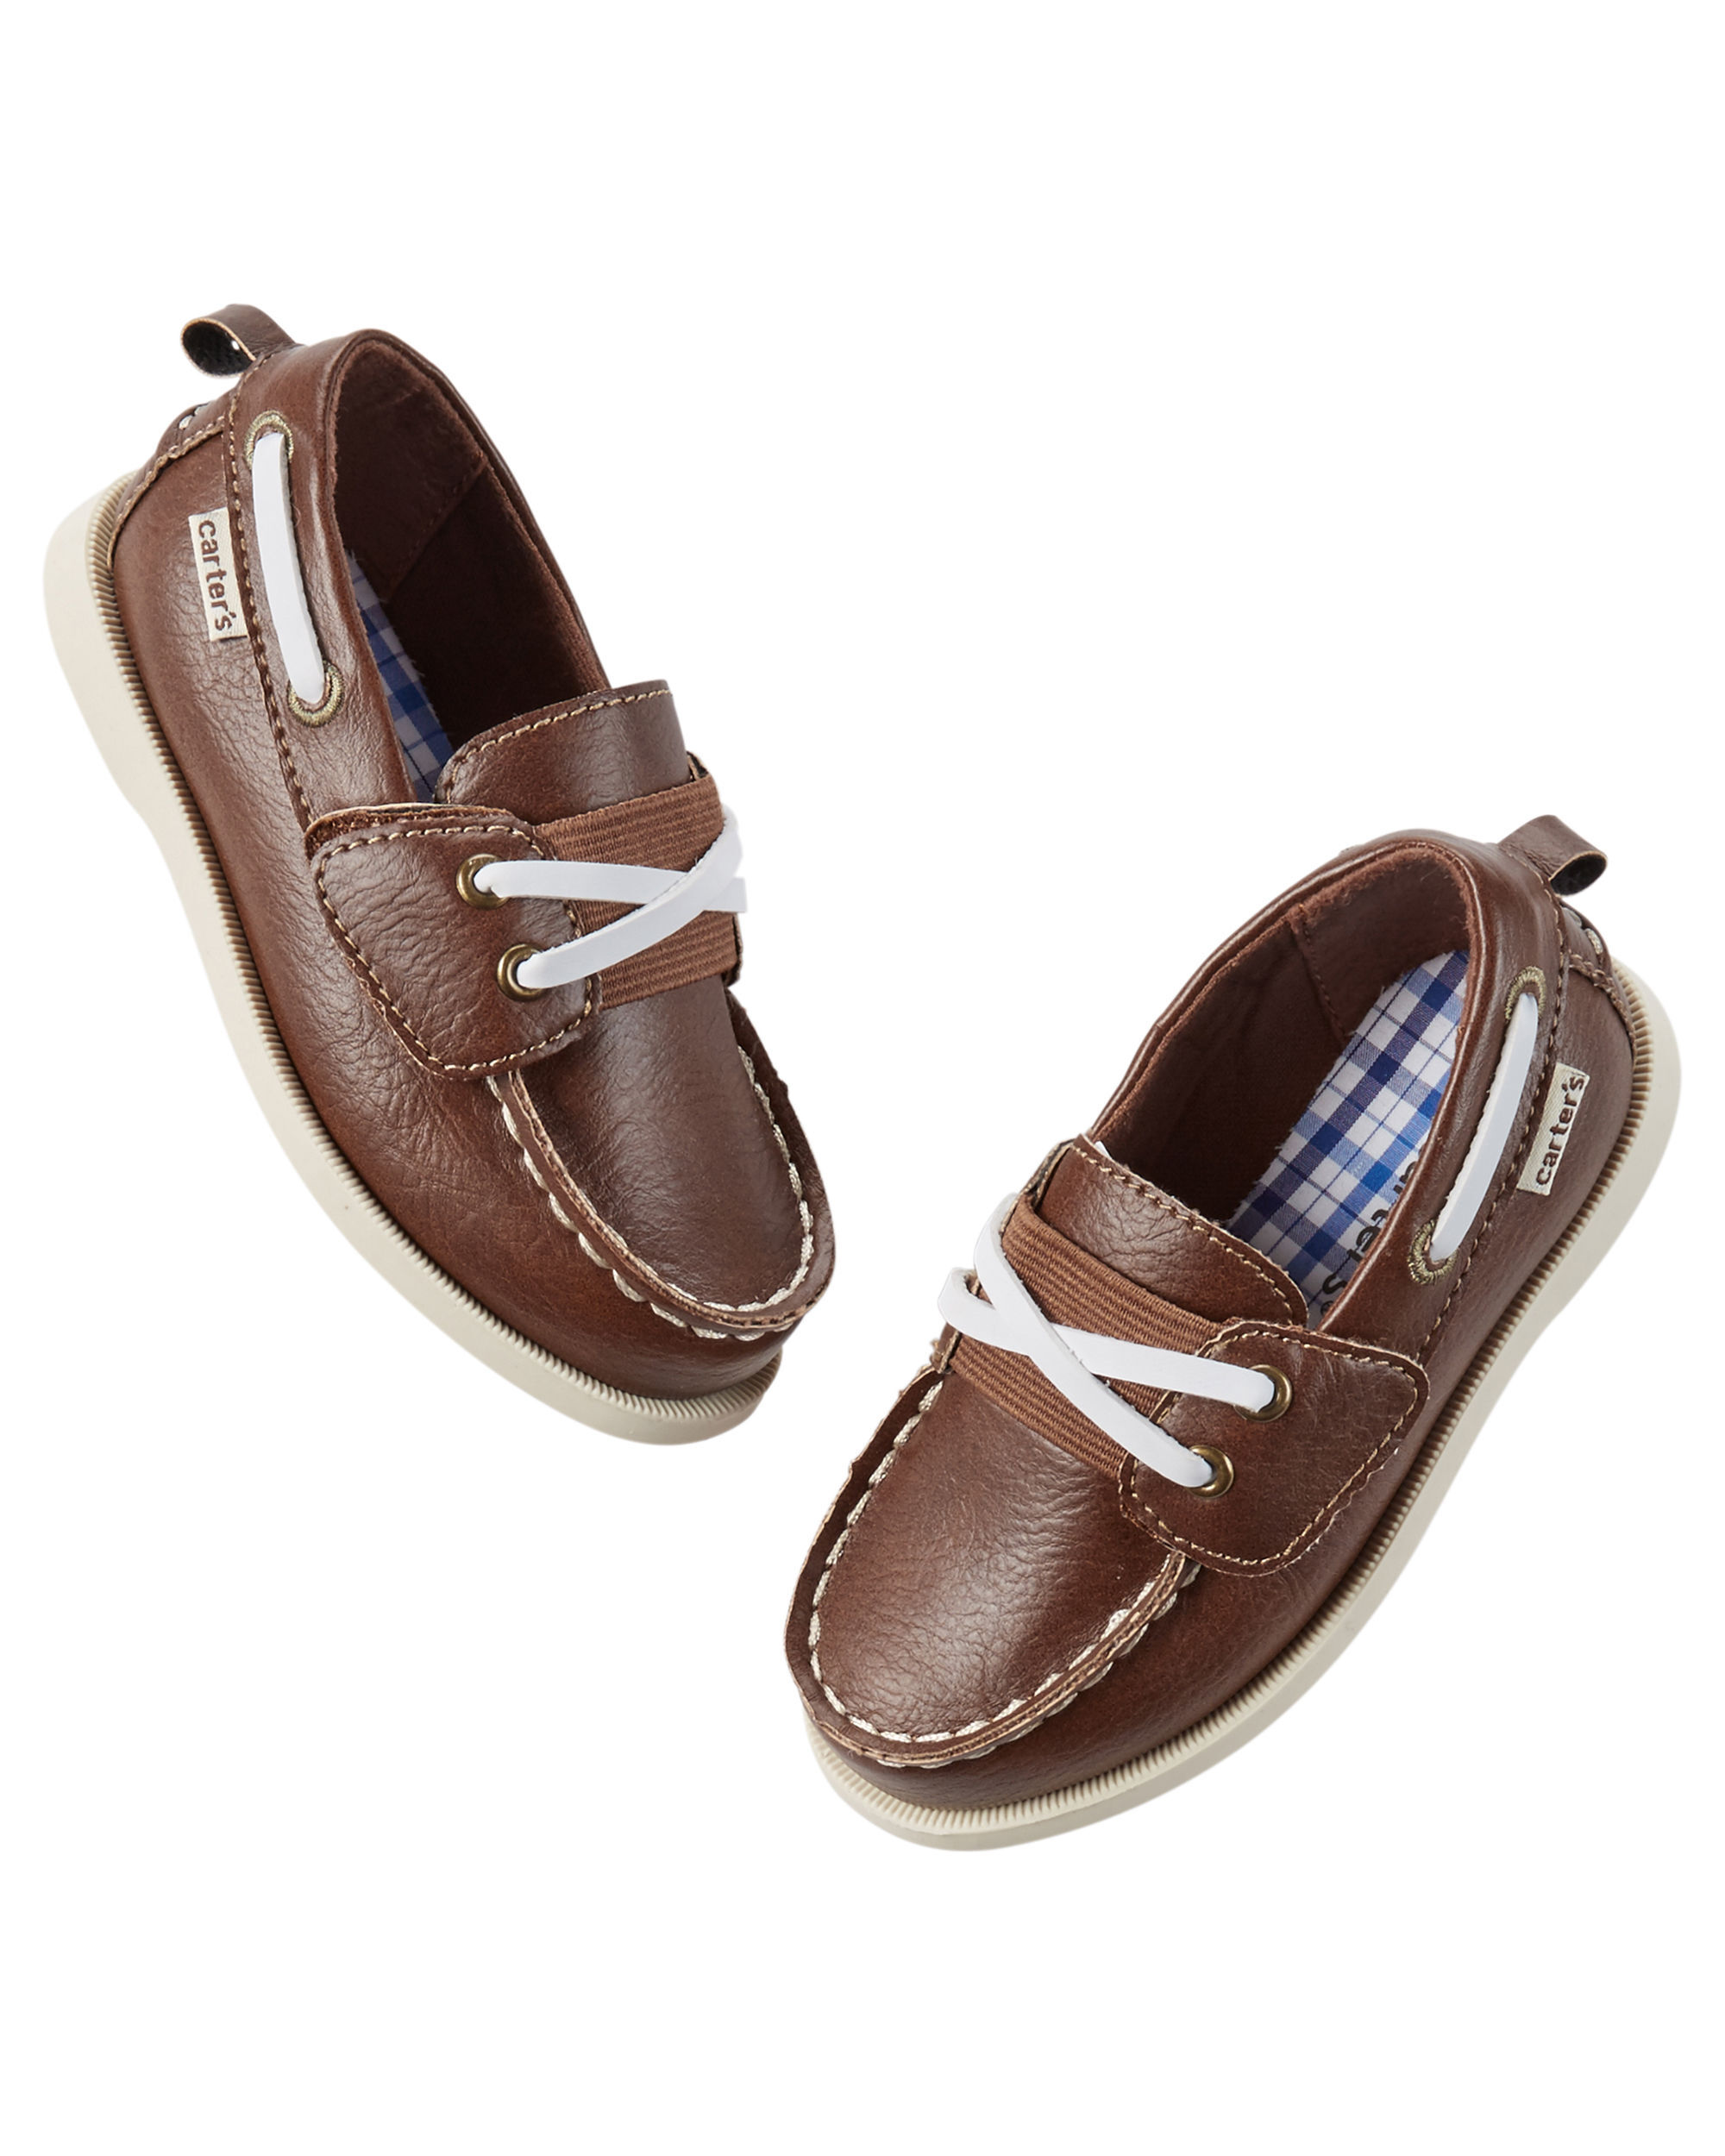 baby boat shoes